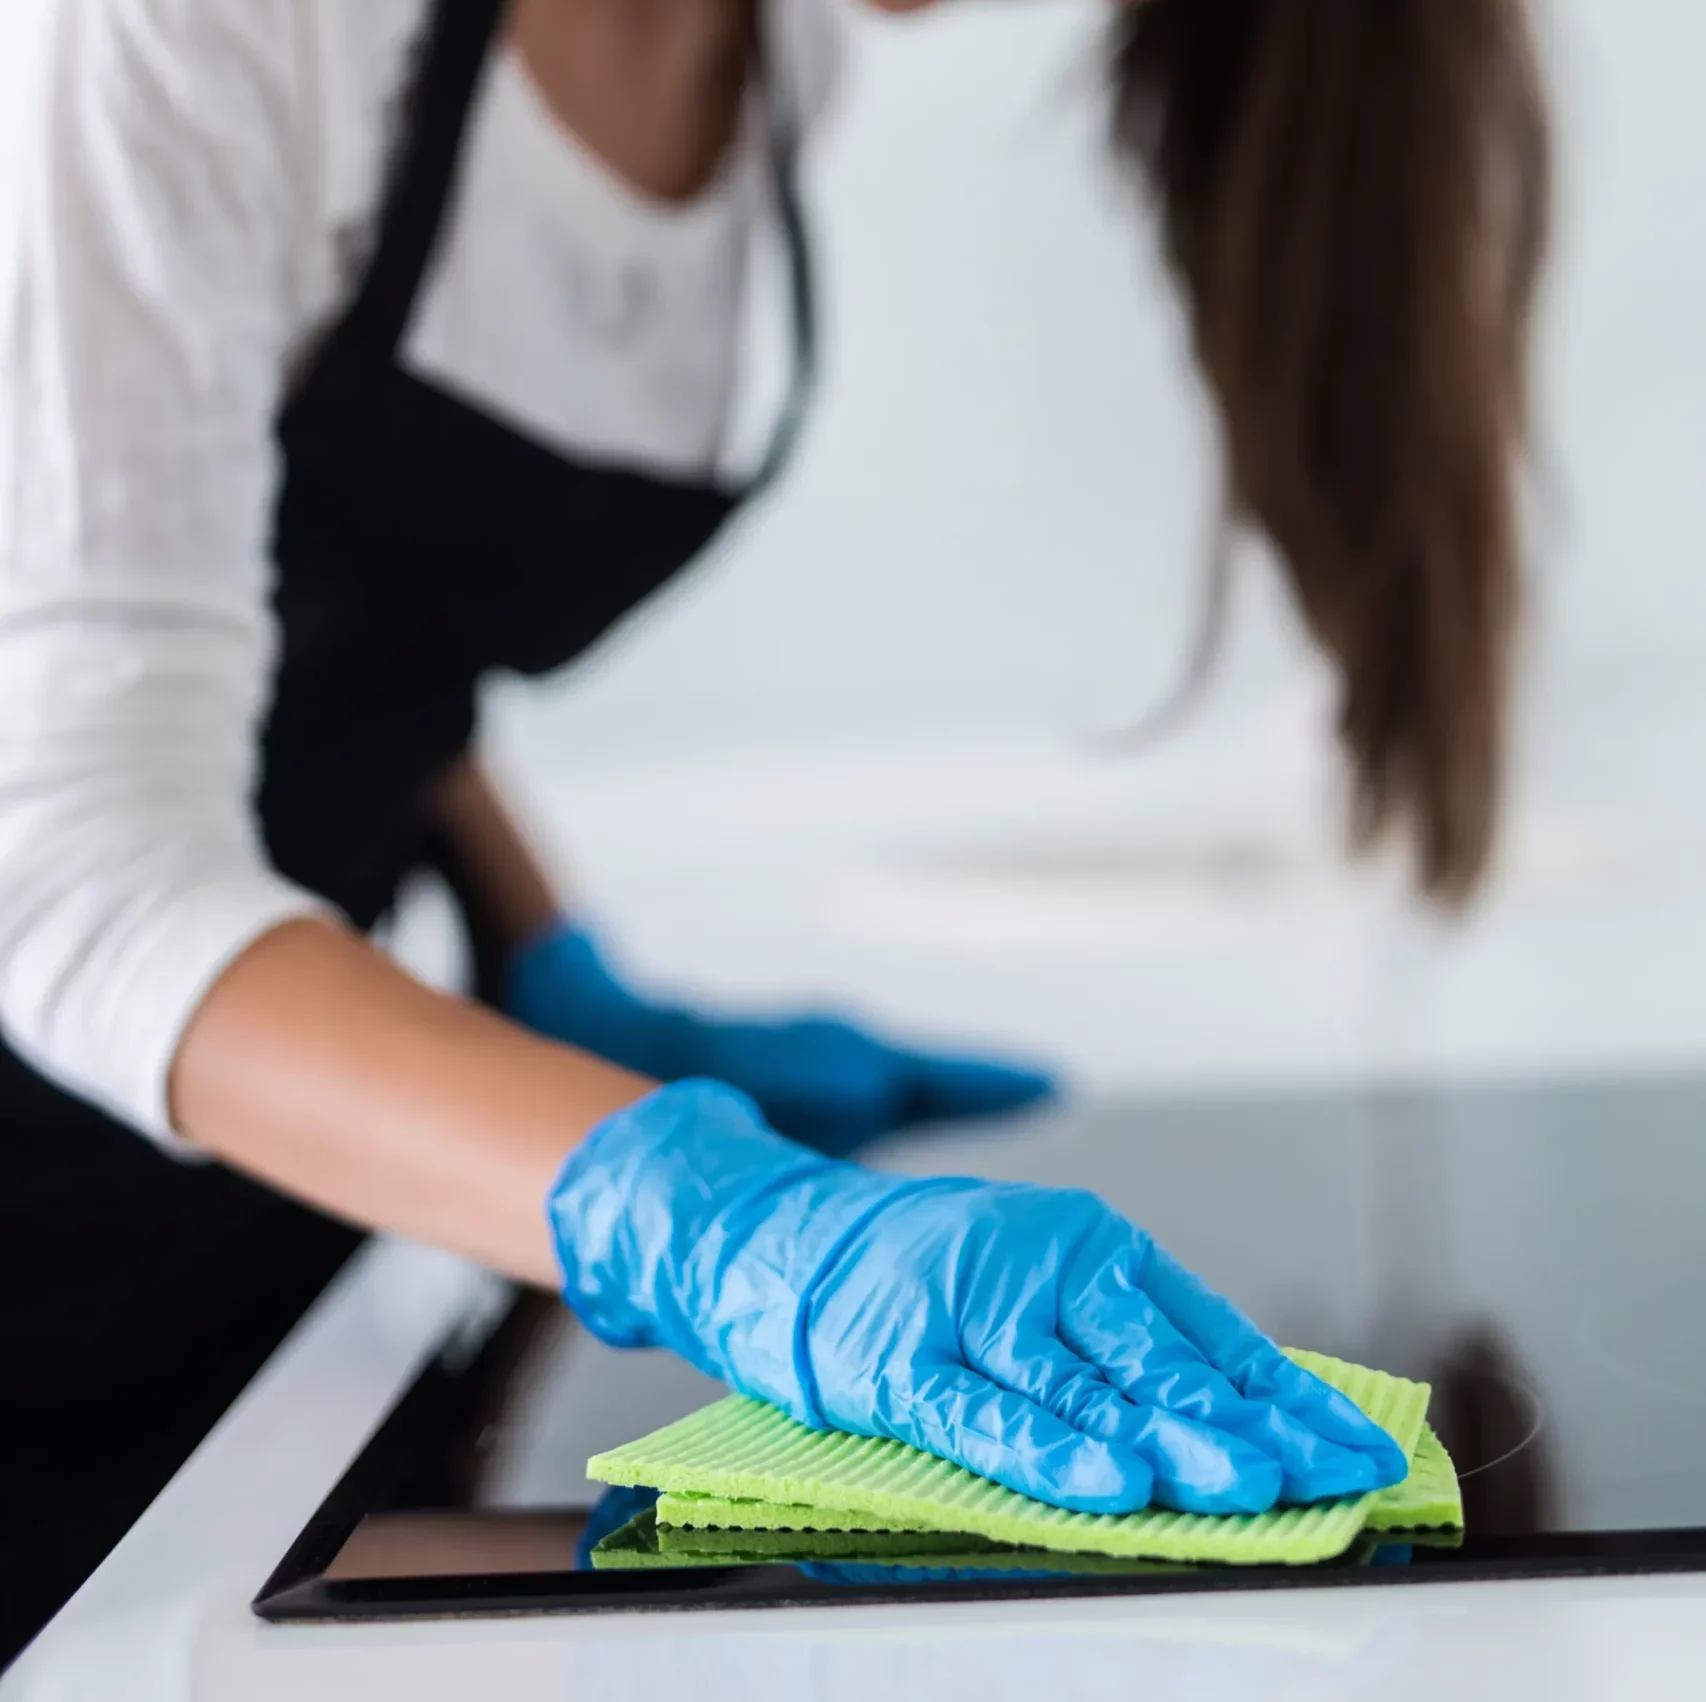 Appliance Maintenance with regular cleaning